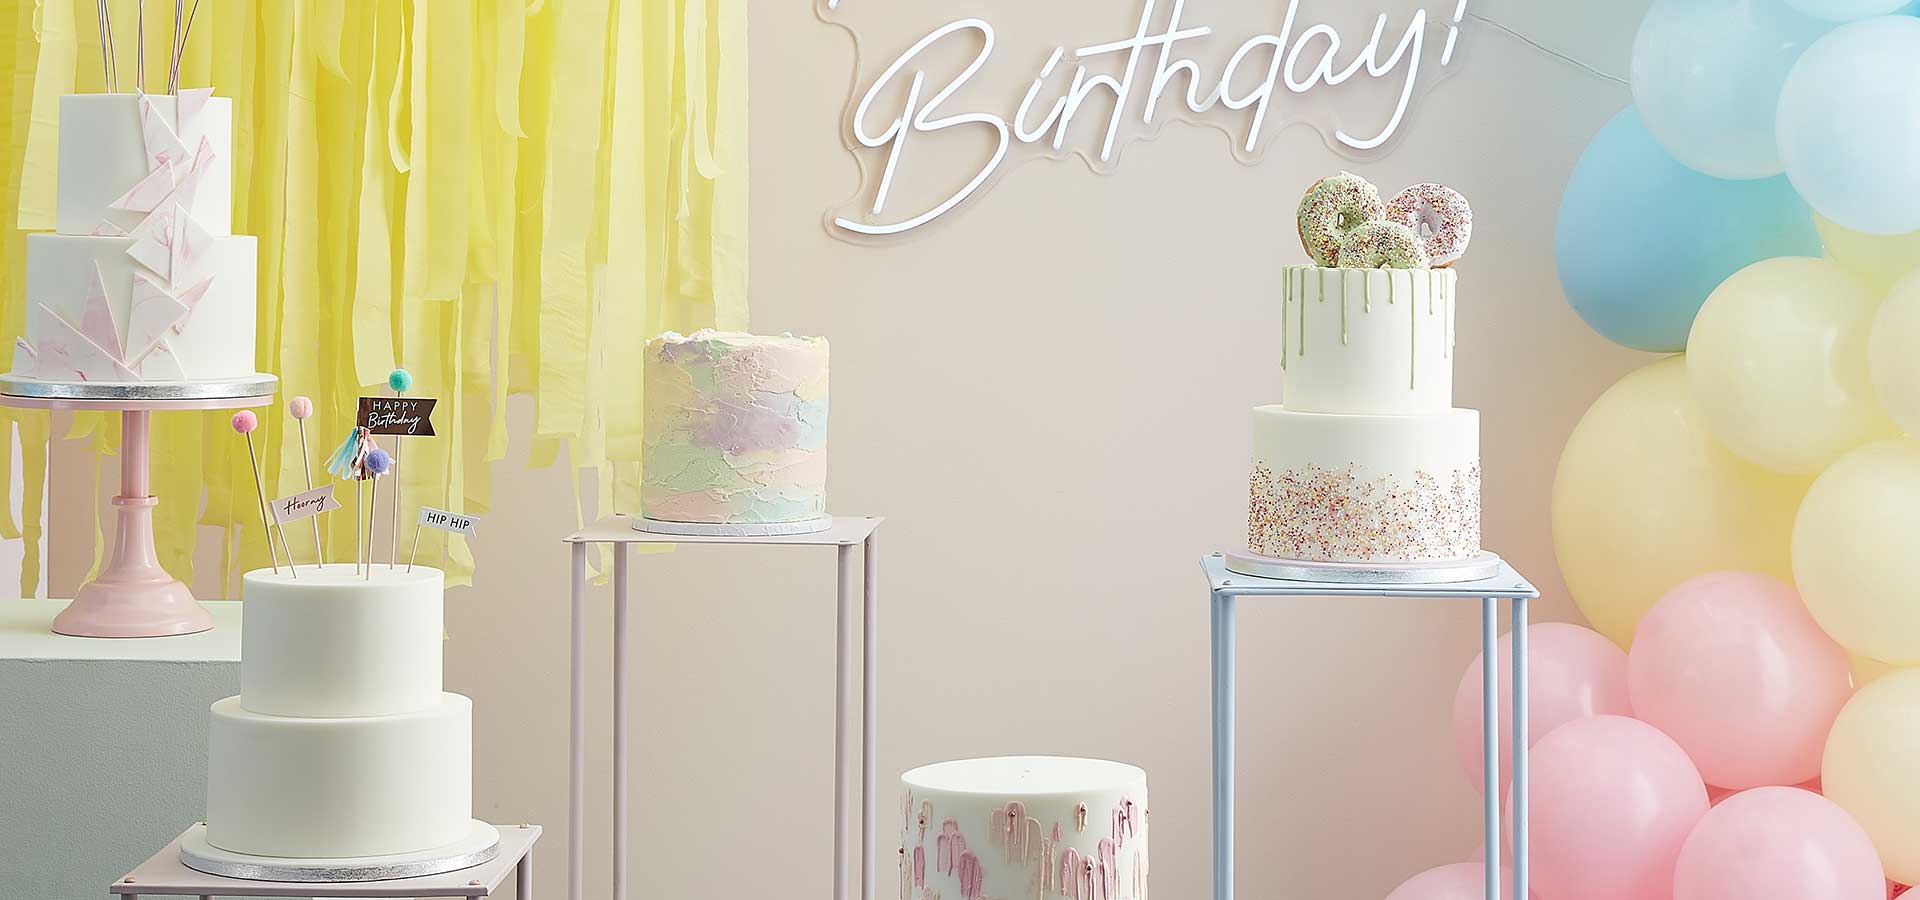 Pastel Birthday Banner with Shimmering Gold Letters, Happy Birthday Bunting  Banner for Party Decorations Kids Girls Birthday Supplies